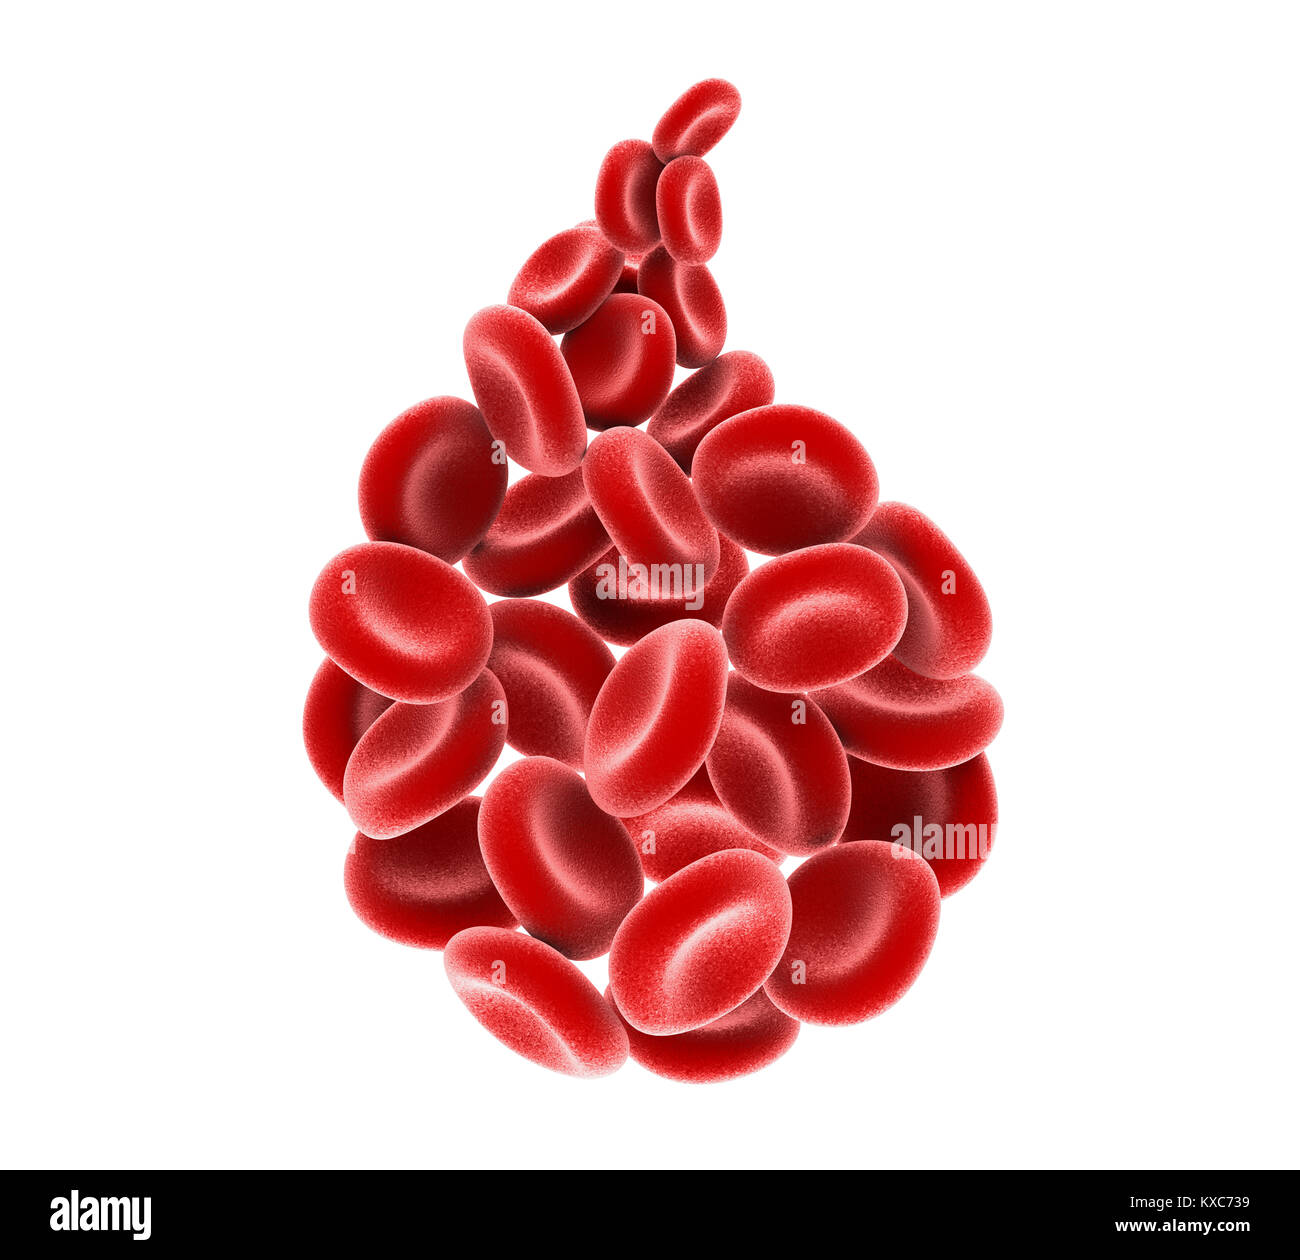 Drop of Red Blood Cells Isolated Stock Photo